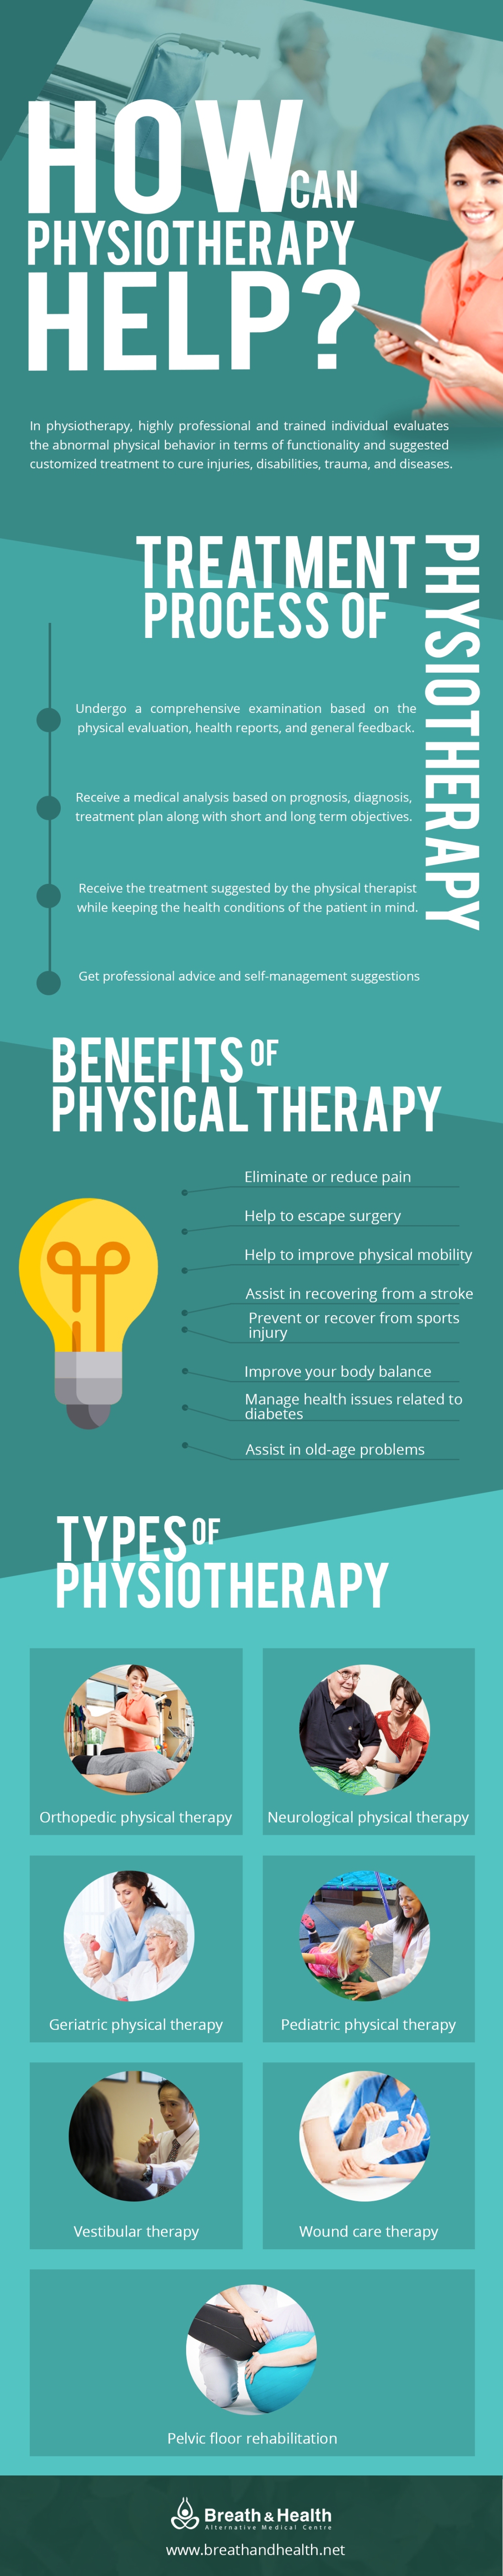 How can physiotherapy help?